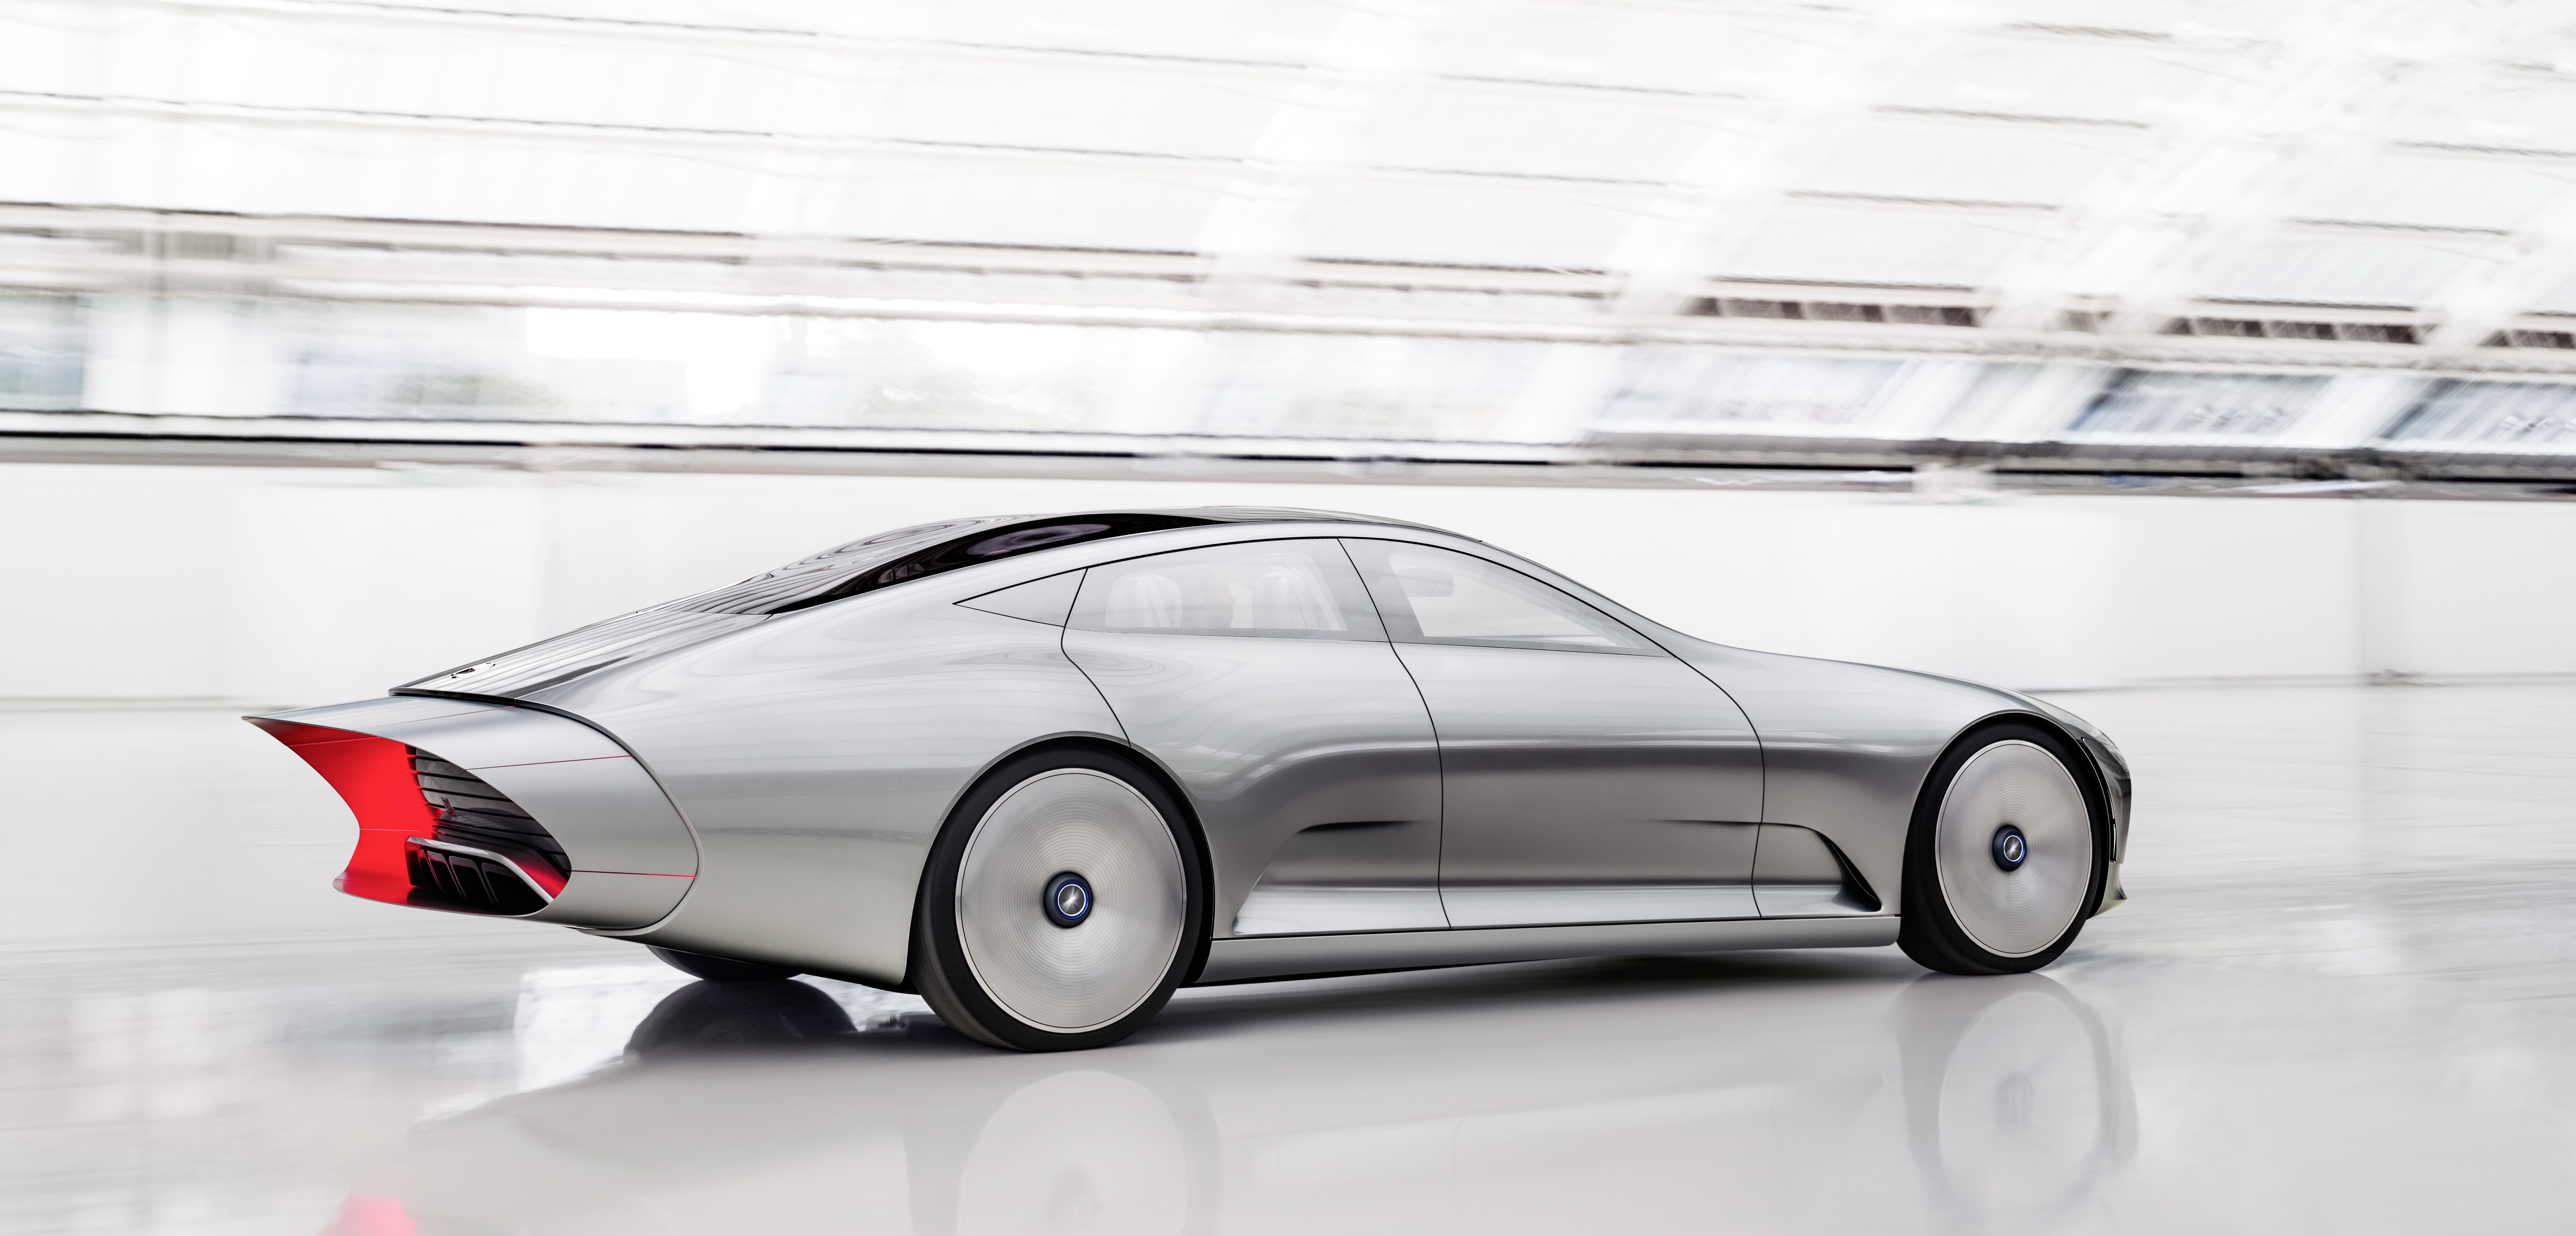 mercedes-benz-concept-iaa-embodies-two-cars-in-one-with-019-drag-coefficient-photo-gallery_14